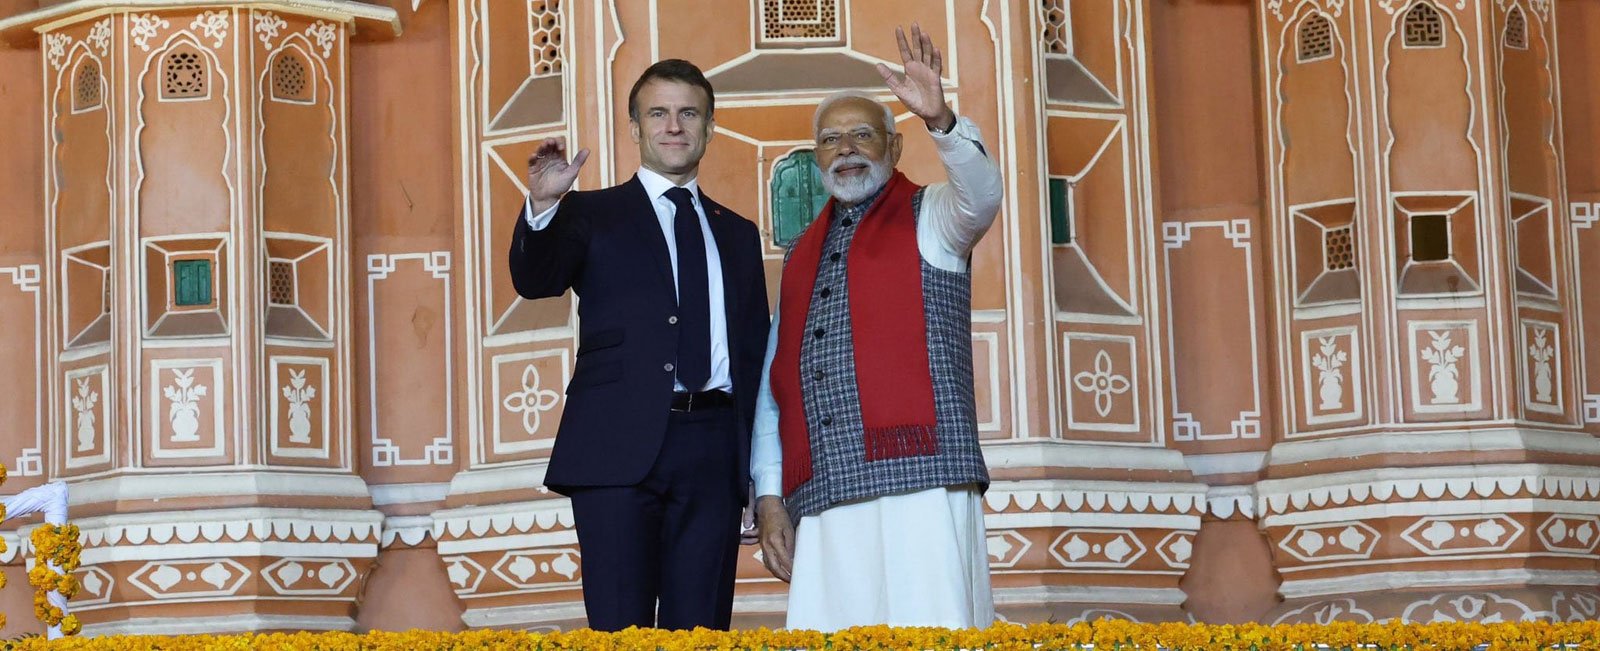 French President Emmanuel Macron visit to India where he was the Chief Guest at the 75th Republic Day Celebrations